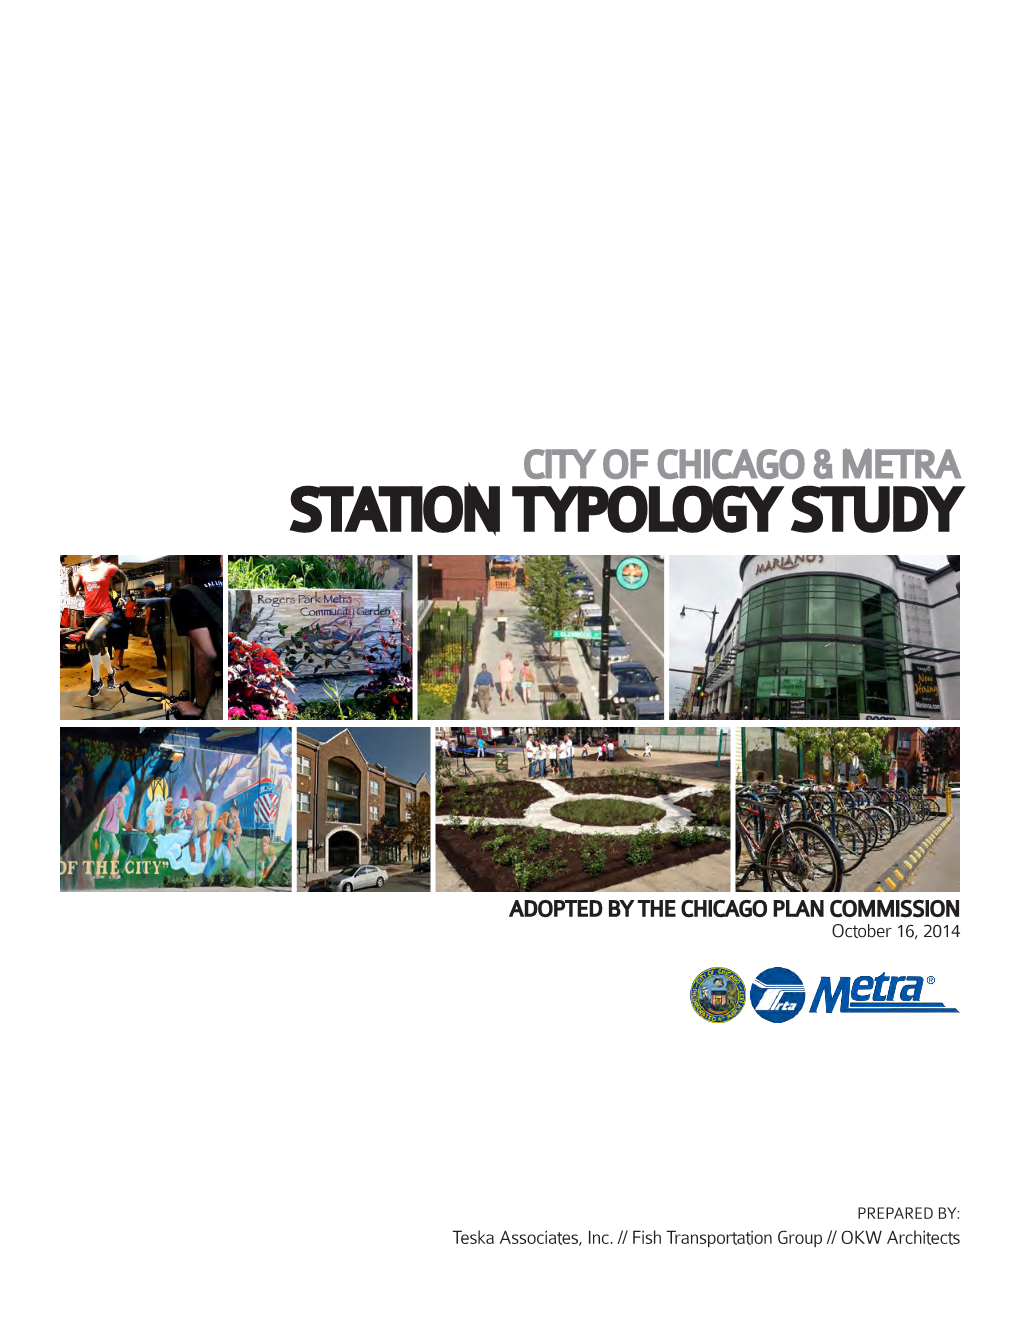 City of Chicago & METRA Station Typology Study